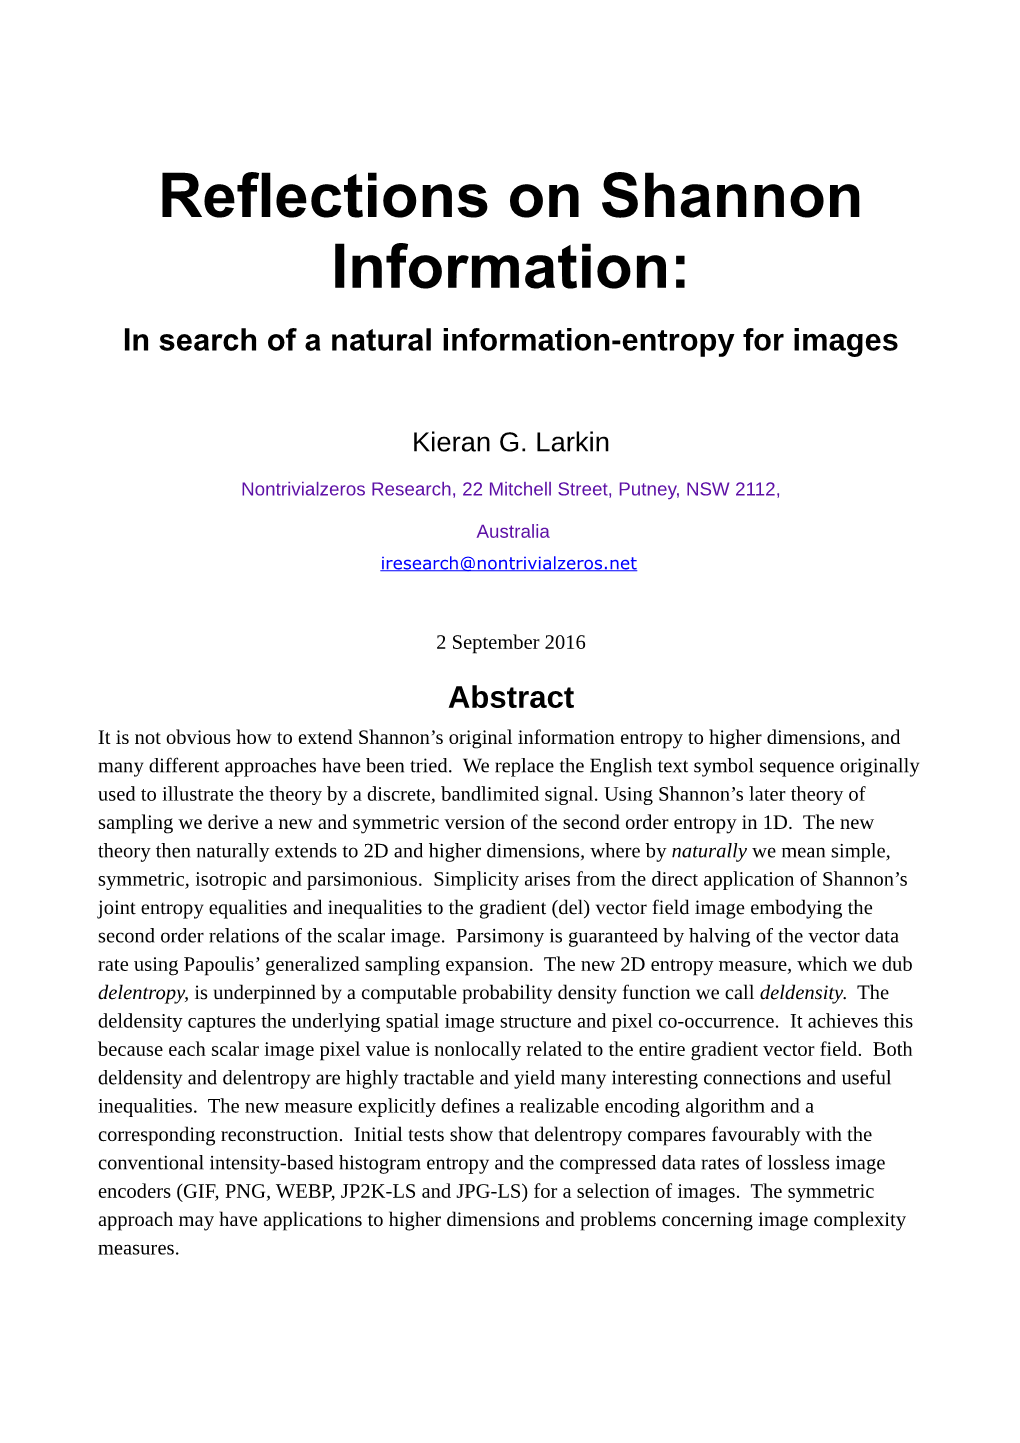 Reflections on Shannon Information: in Search of a Natural Information-Entropy for Images